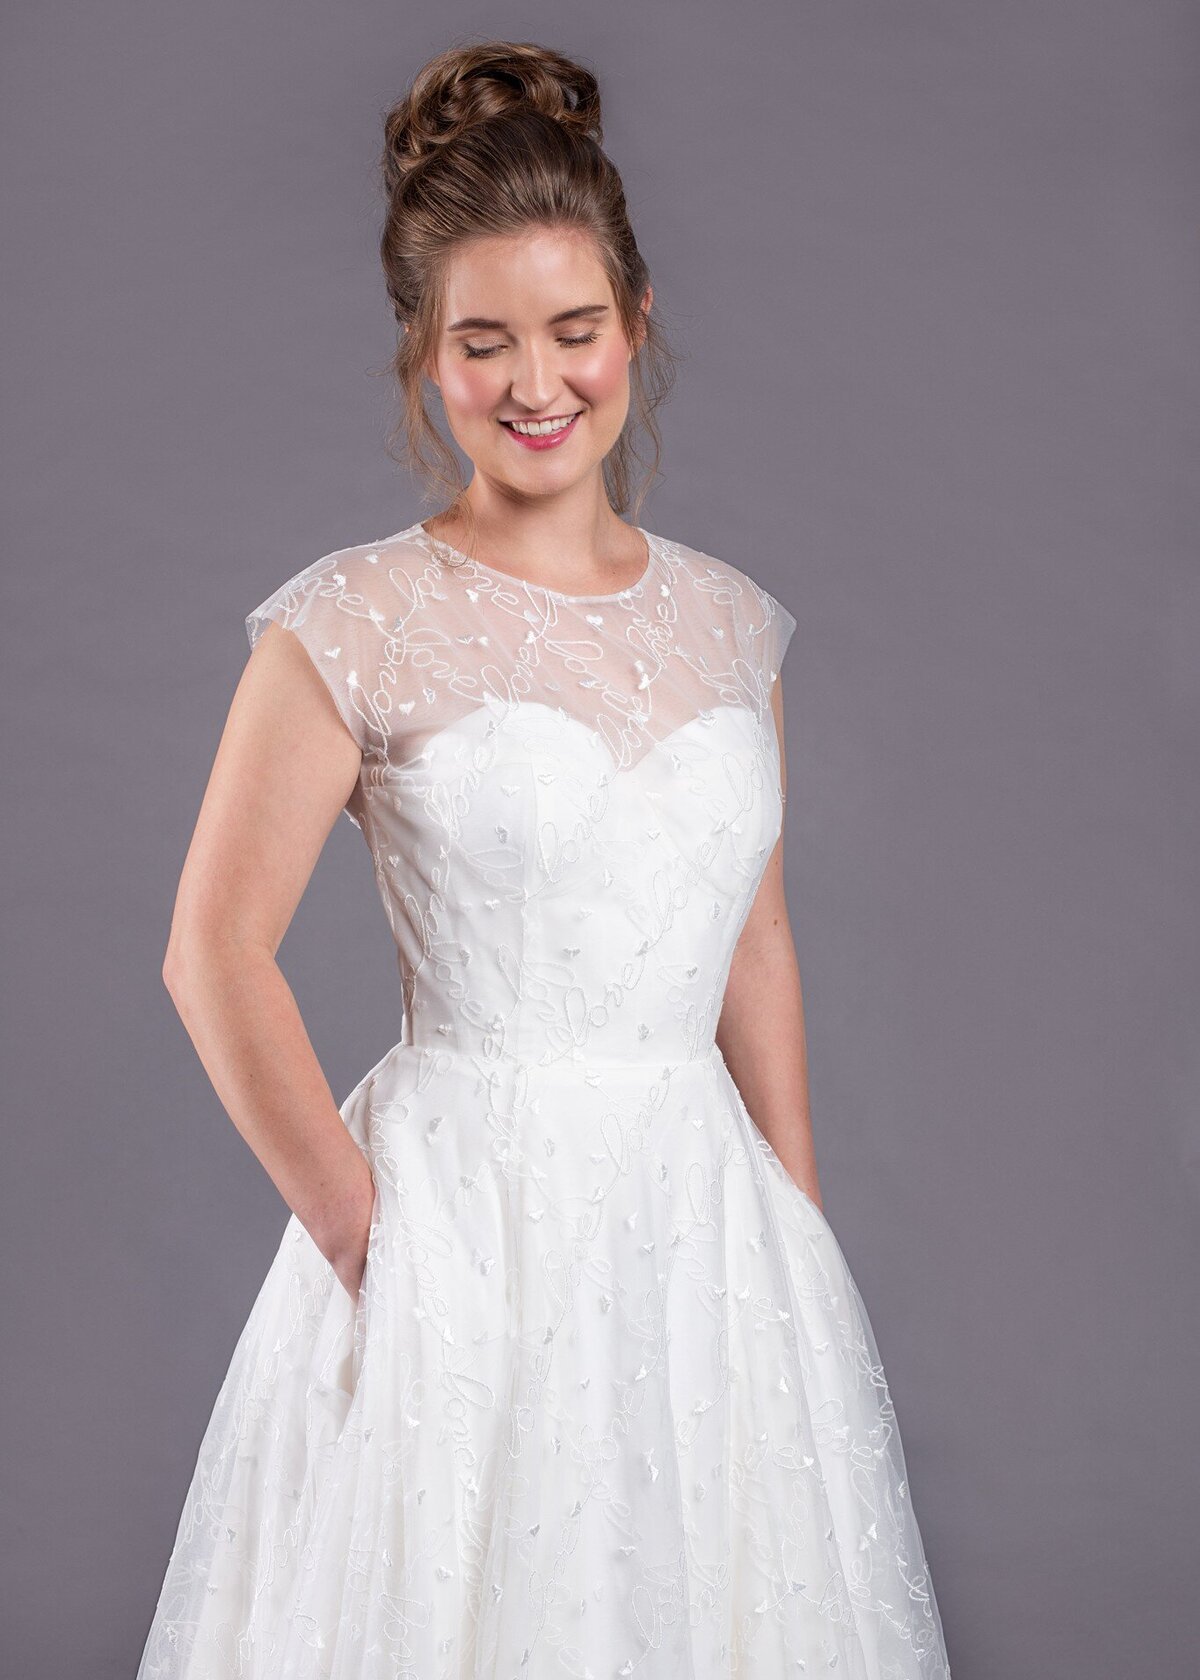 The strapless corseted foundation of the Norma Jean bridal style sits under the embroidered high-neck illusion bodice.